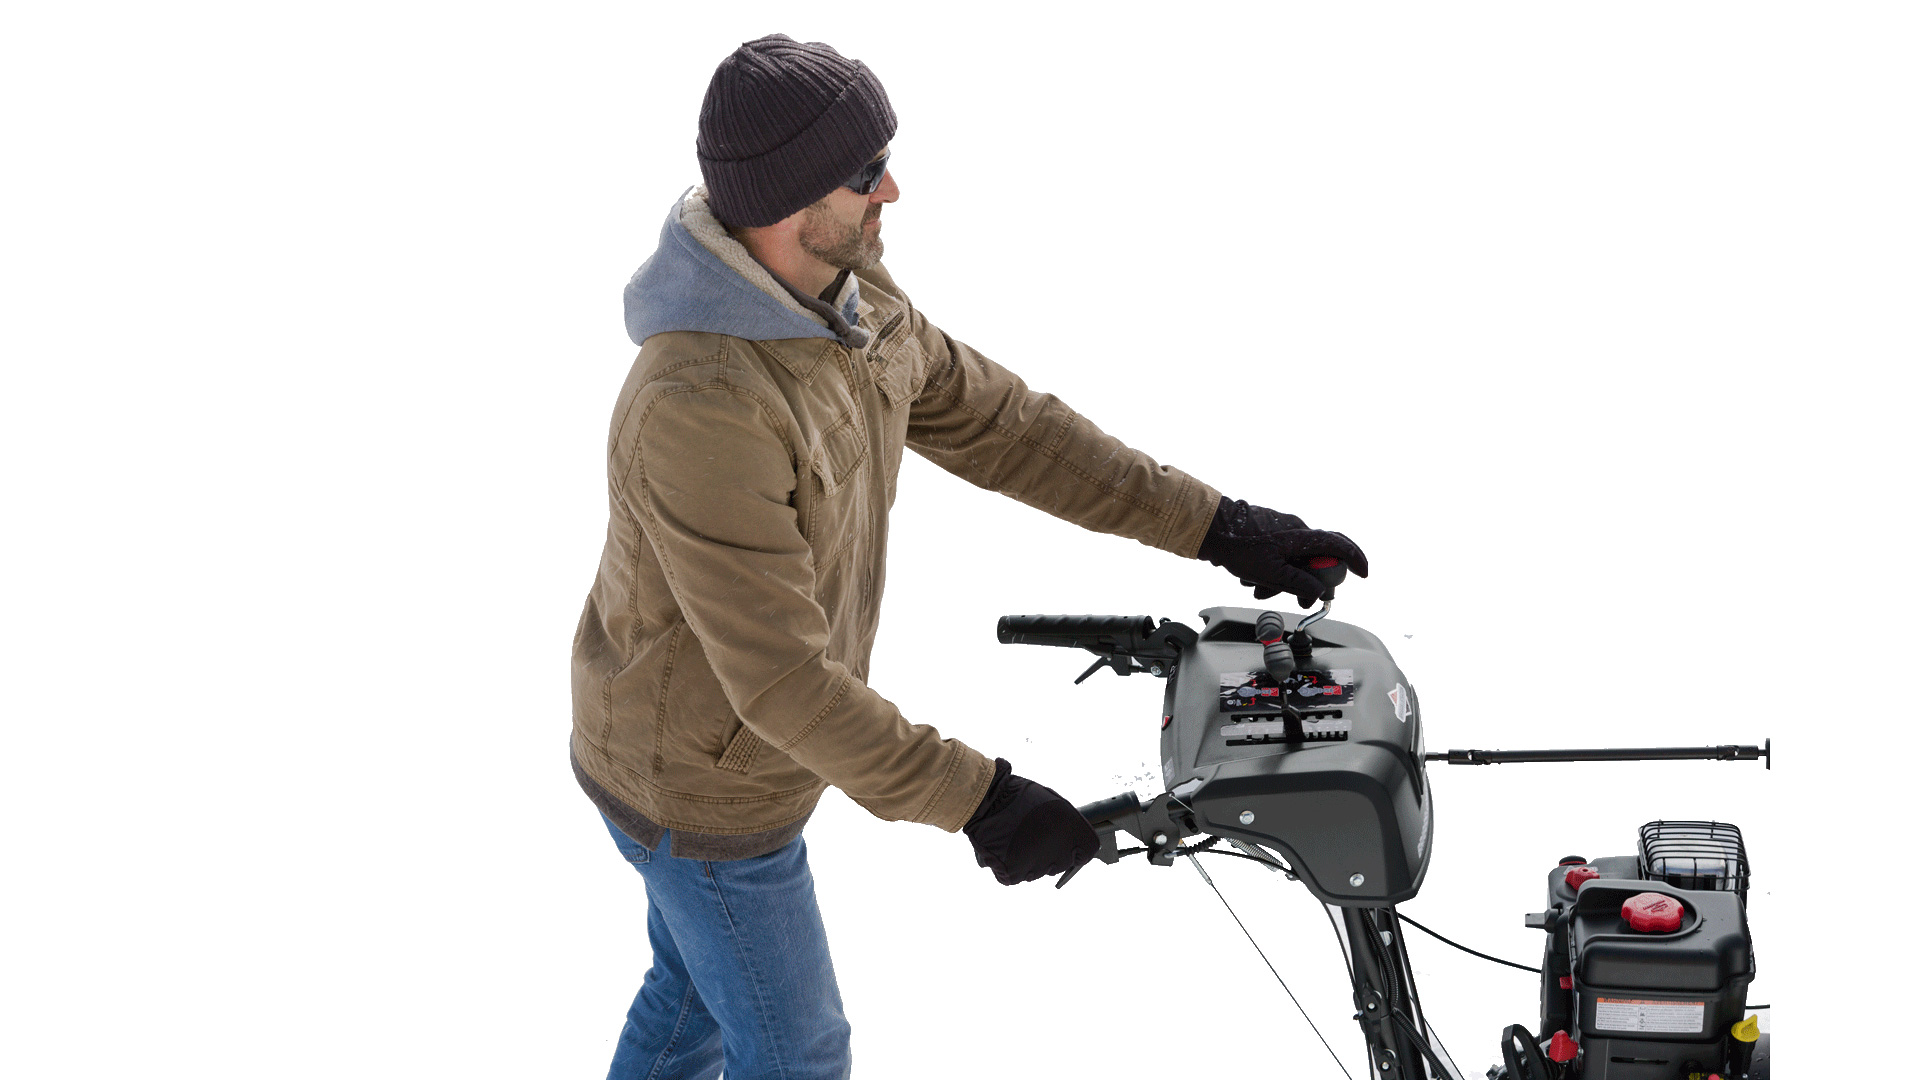 a man with a beard and hat pushing a machine